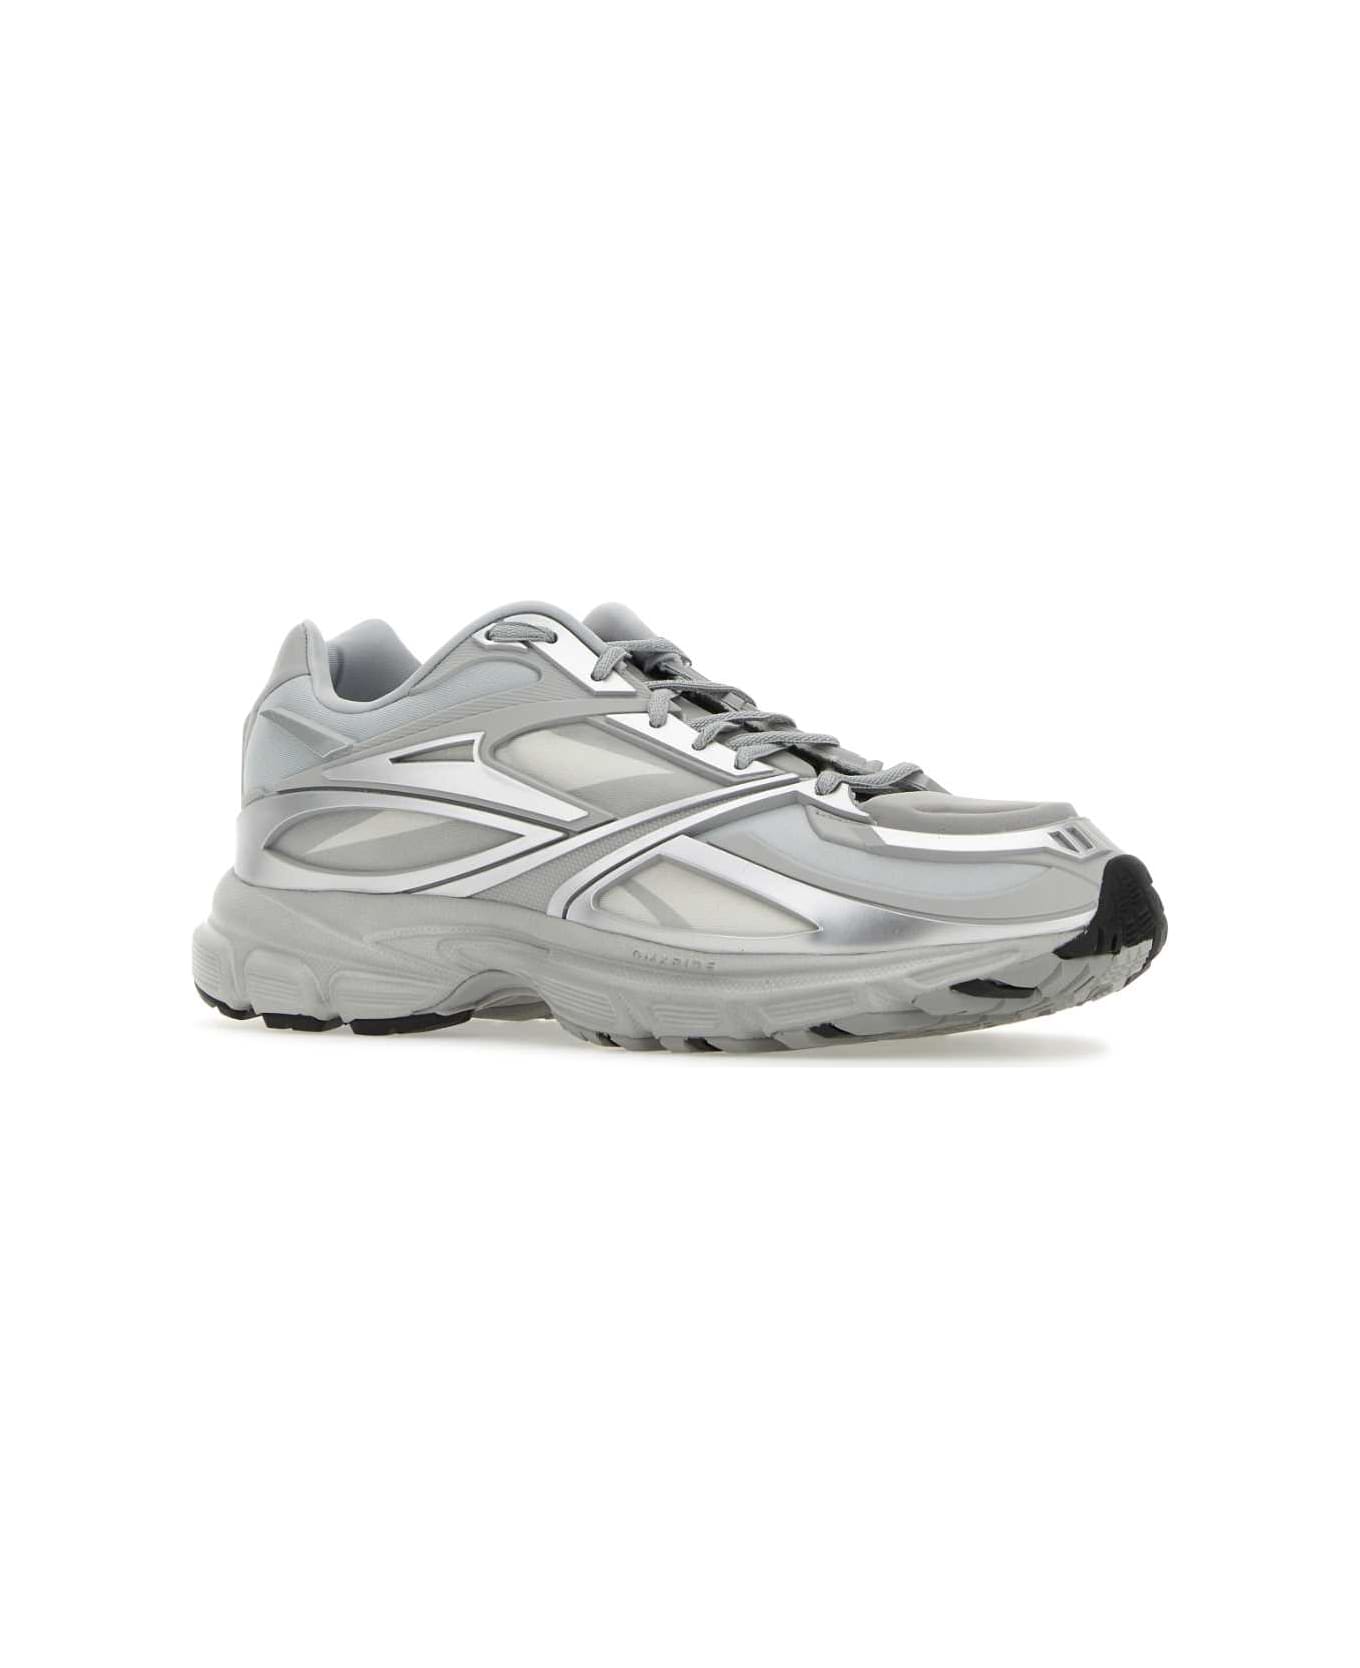 Reebok Grey Fabric And Rubber Premier Road Modern Sneakers - SILVER